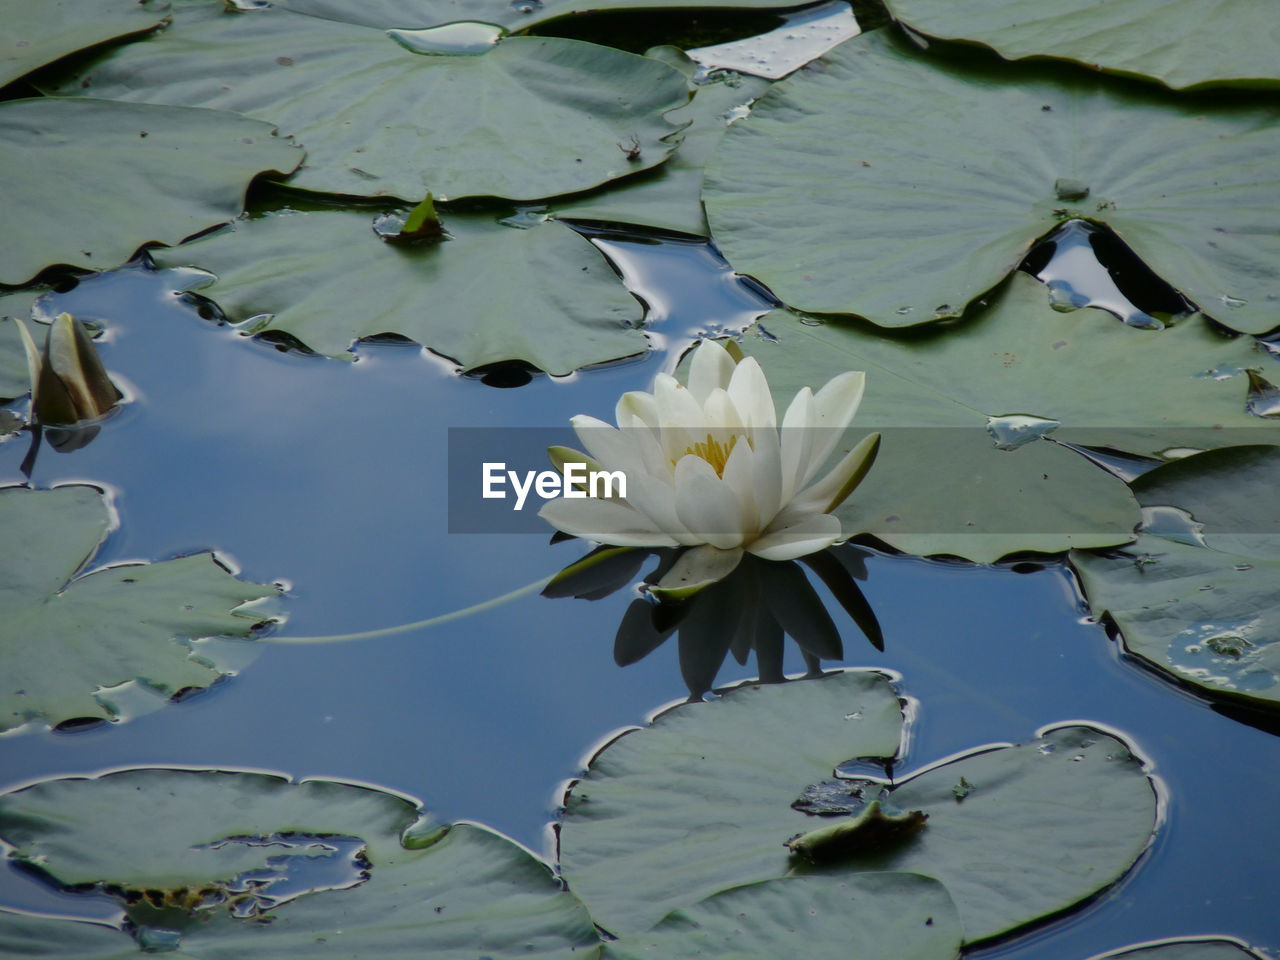 WATER LILIES IN LAKE